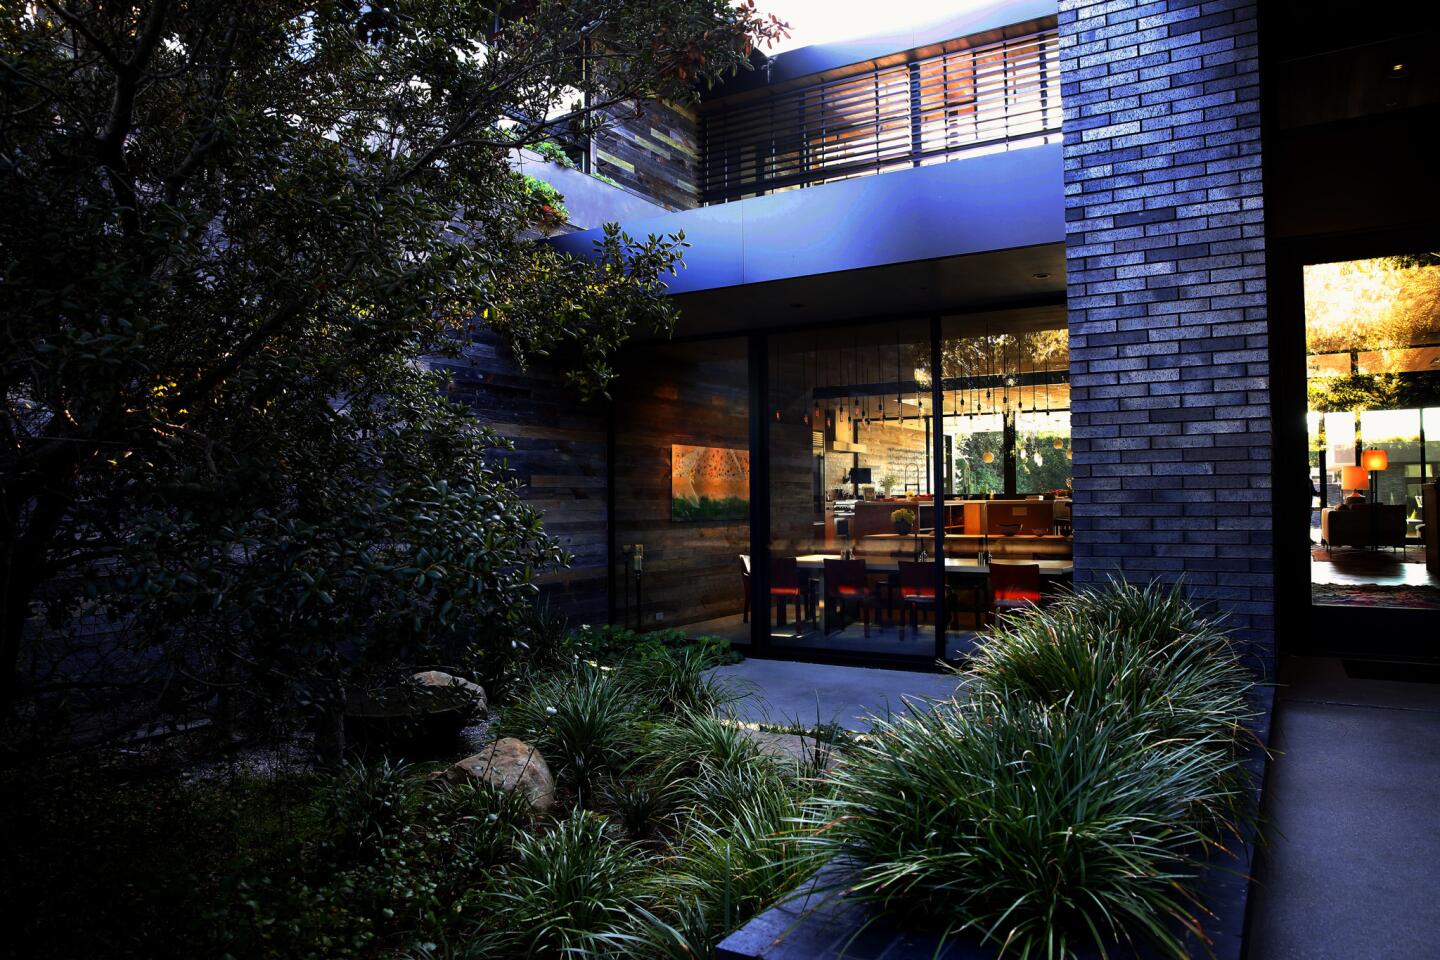 The front courtyard of the Hirsch home, designed and built by Marmol Radziner, is illuminated at dusk. Dark Iron Spot face brick and weathered wood siding unify the separate living areas.